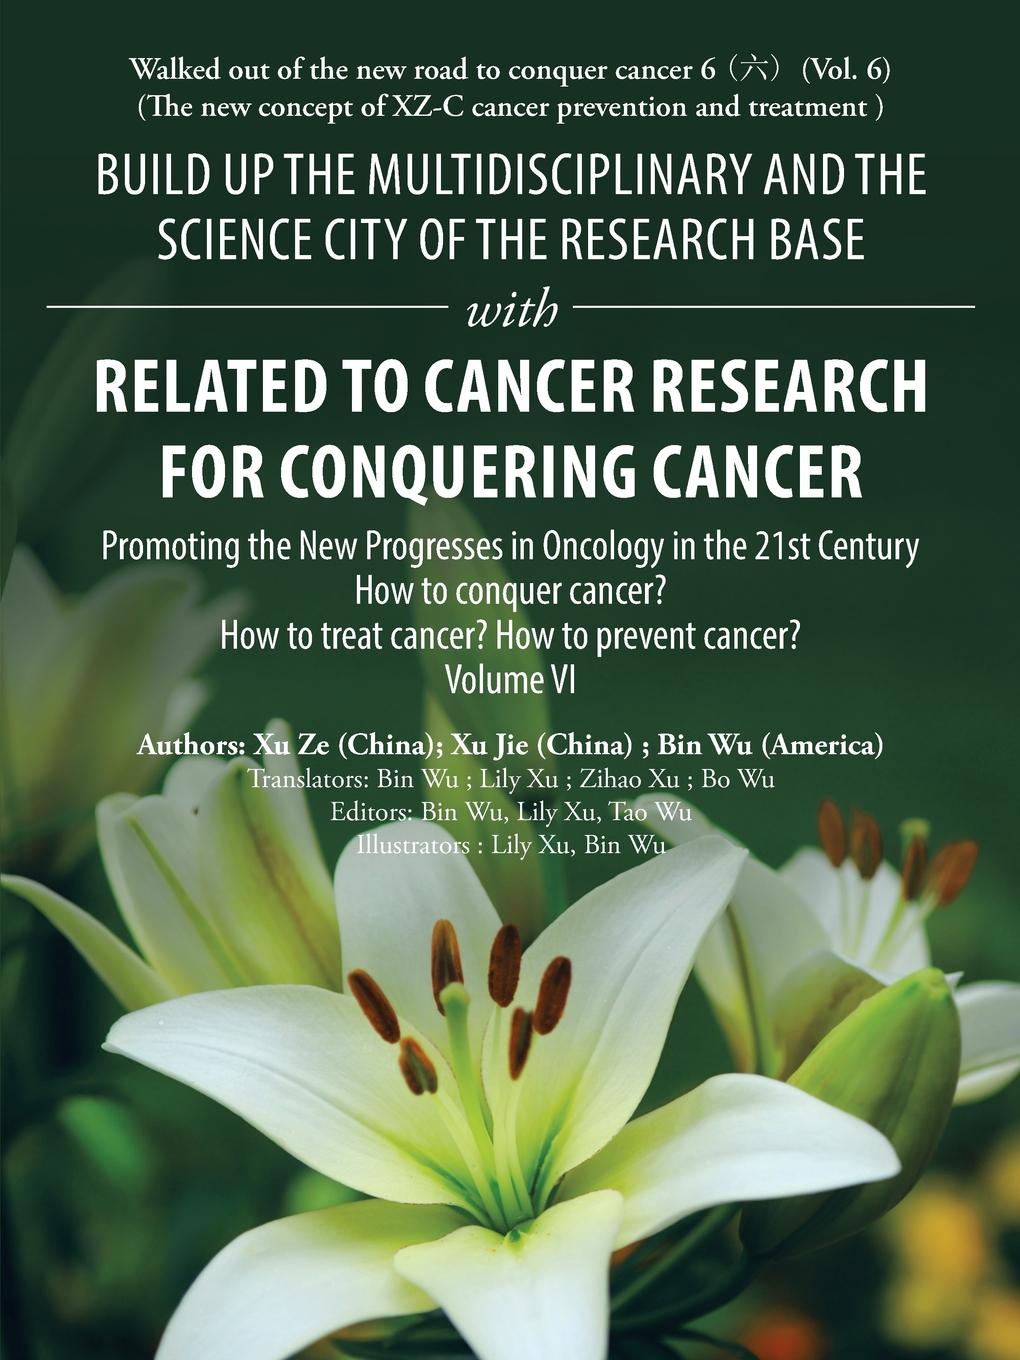 Build up the Multidisciplinary and the Science City of the Research Base with Related to Cancer Research for Conquering Cancer. Promoting the New Progresses in Oncology in the 21St Century Volume Vi